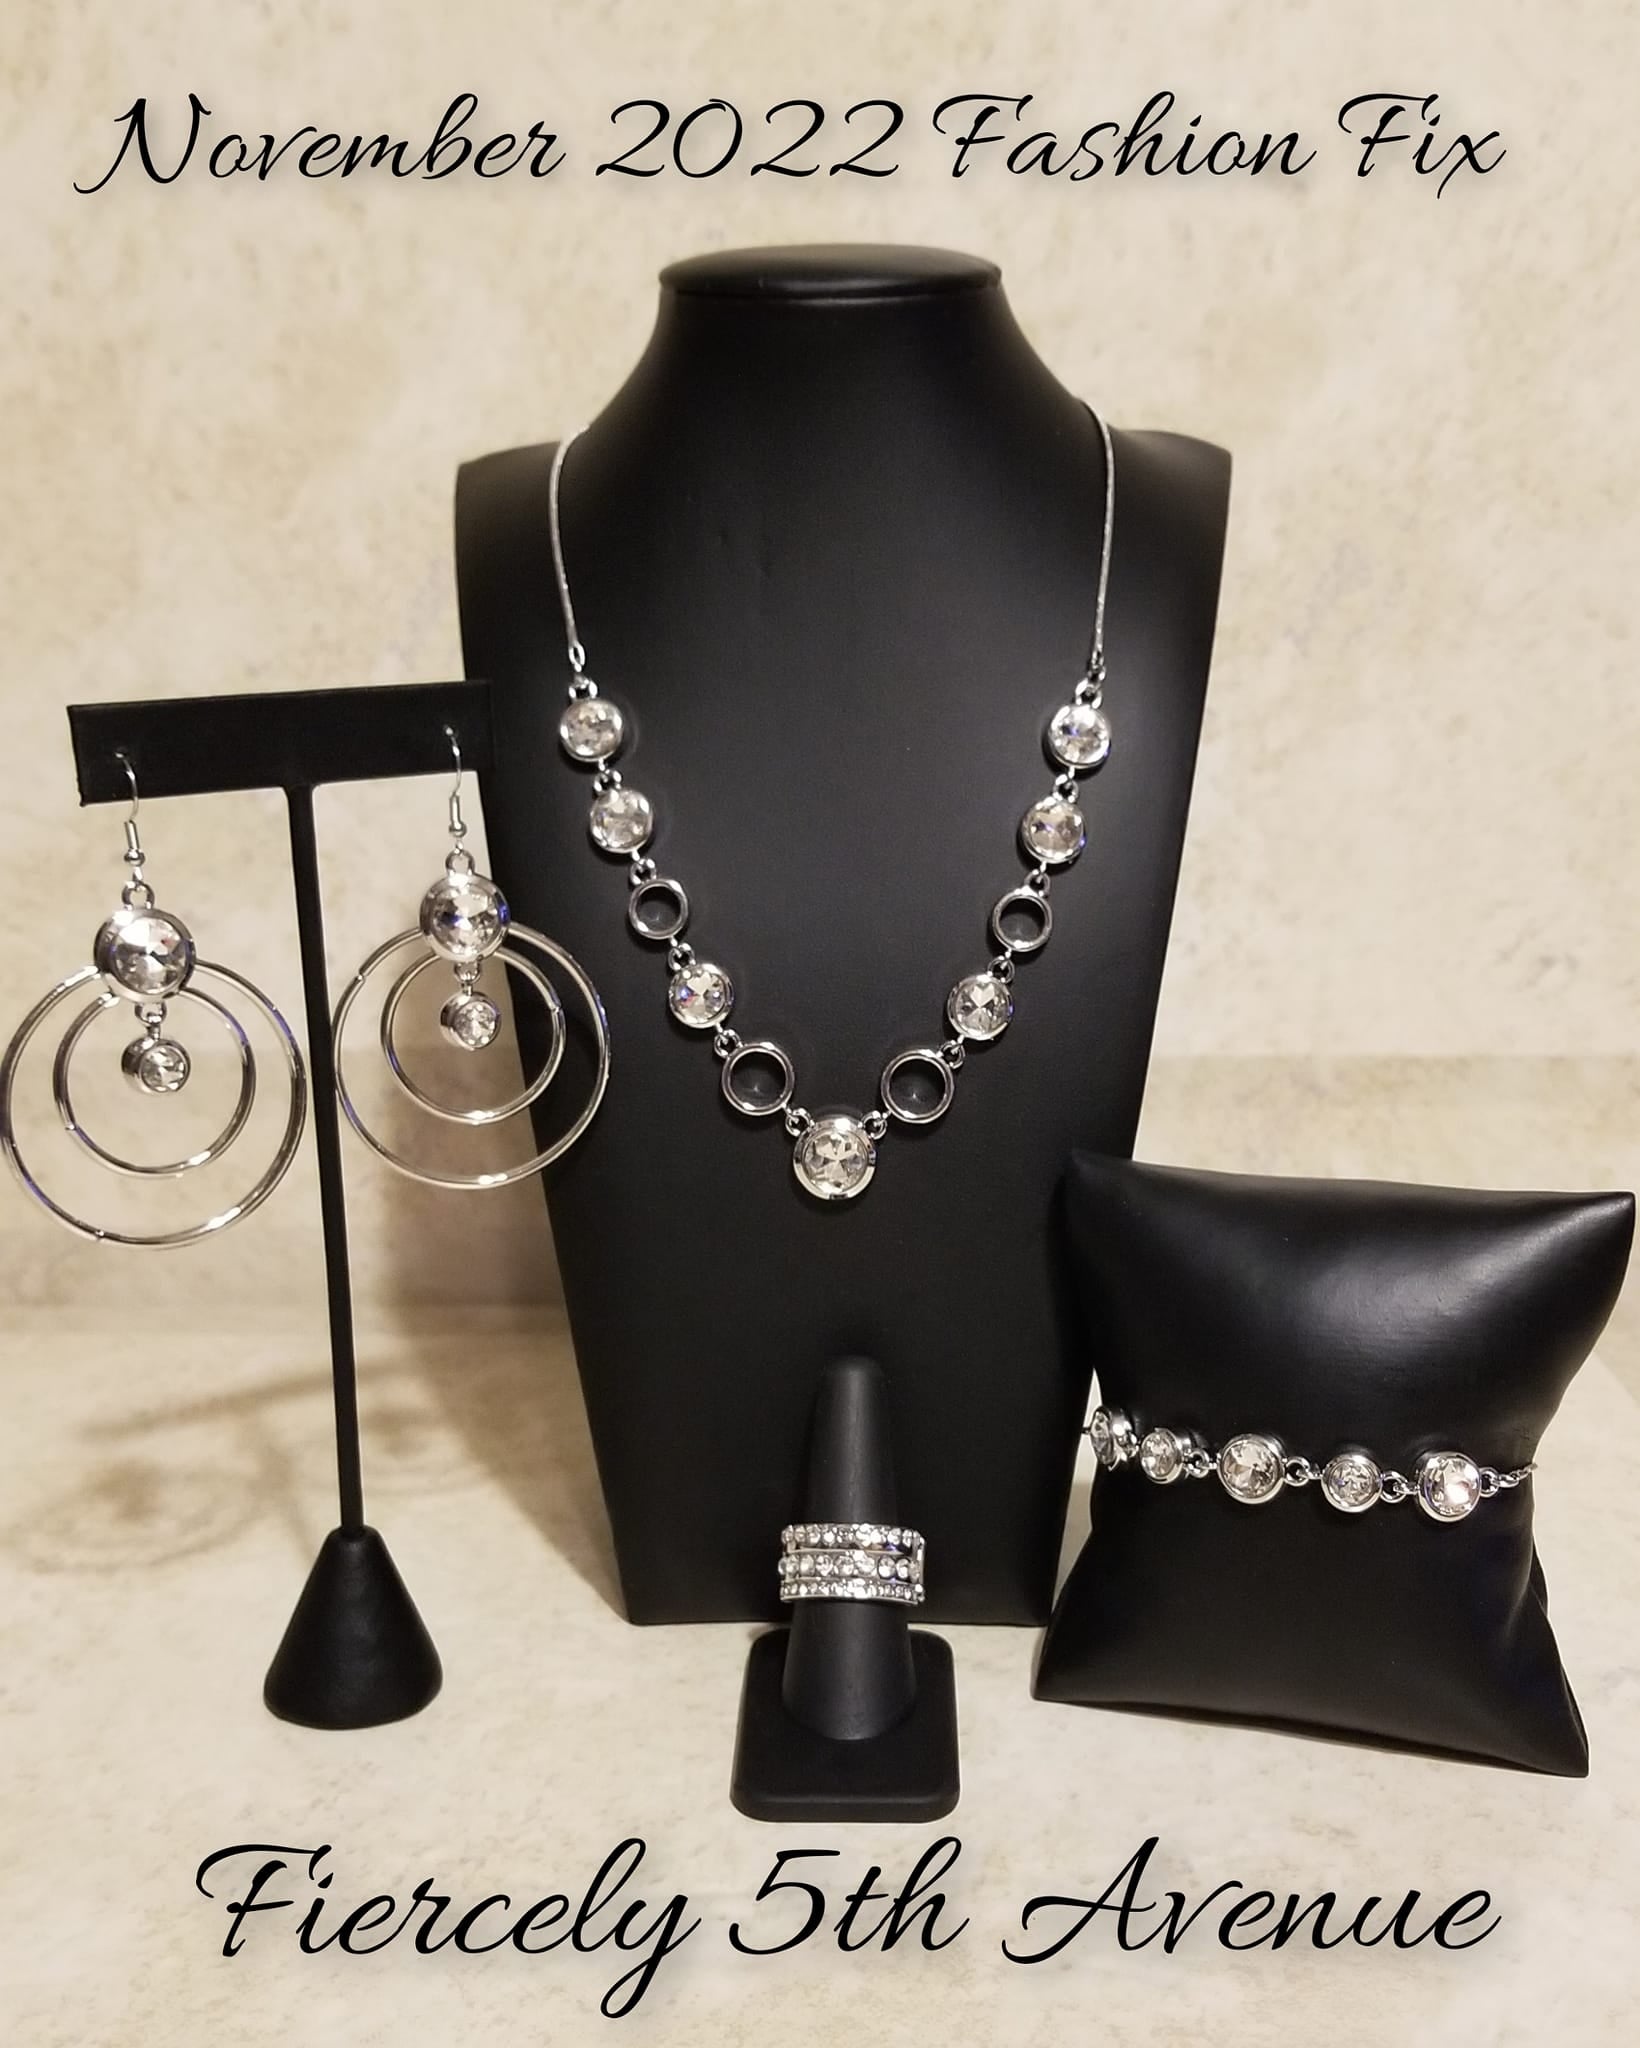 Fiercely 5th Avenue Fashion Fix by Paparazzi Accessories (November 2022)